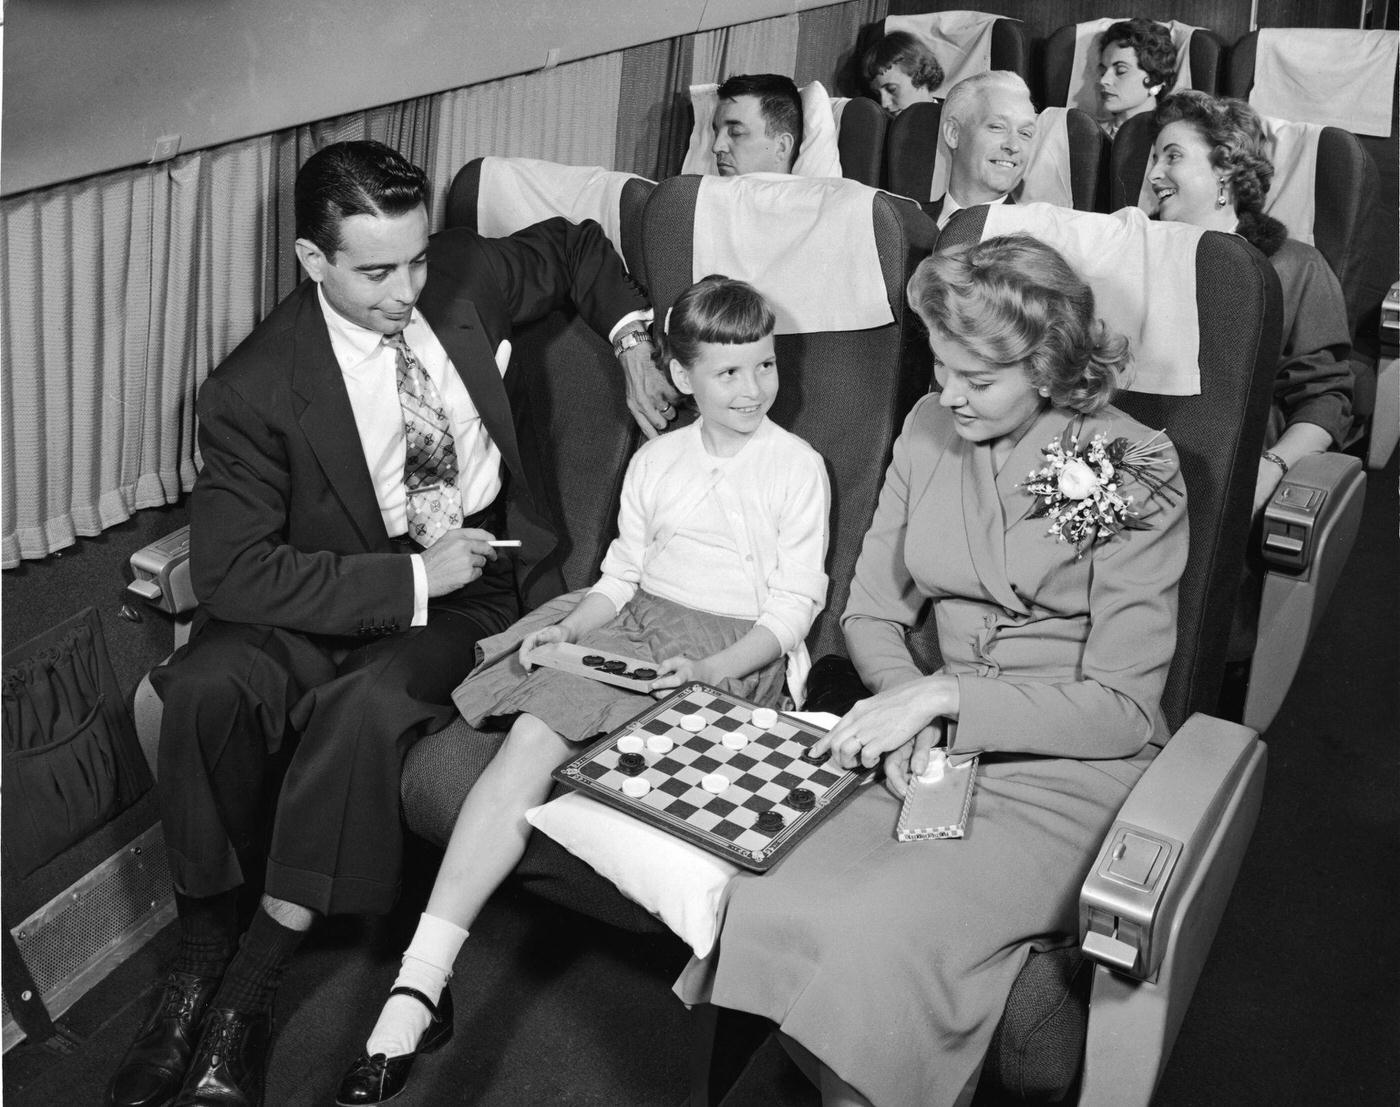 In the 1950s, an interior view of a commercial passenger plane shows a woman contemplating a move in a checkers game she is losing to a young girl, while a man with a cigarette watches them.